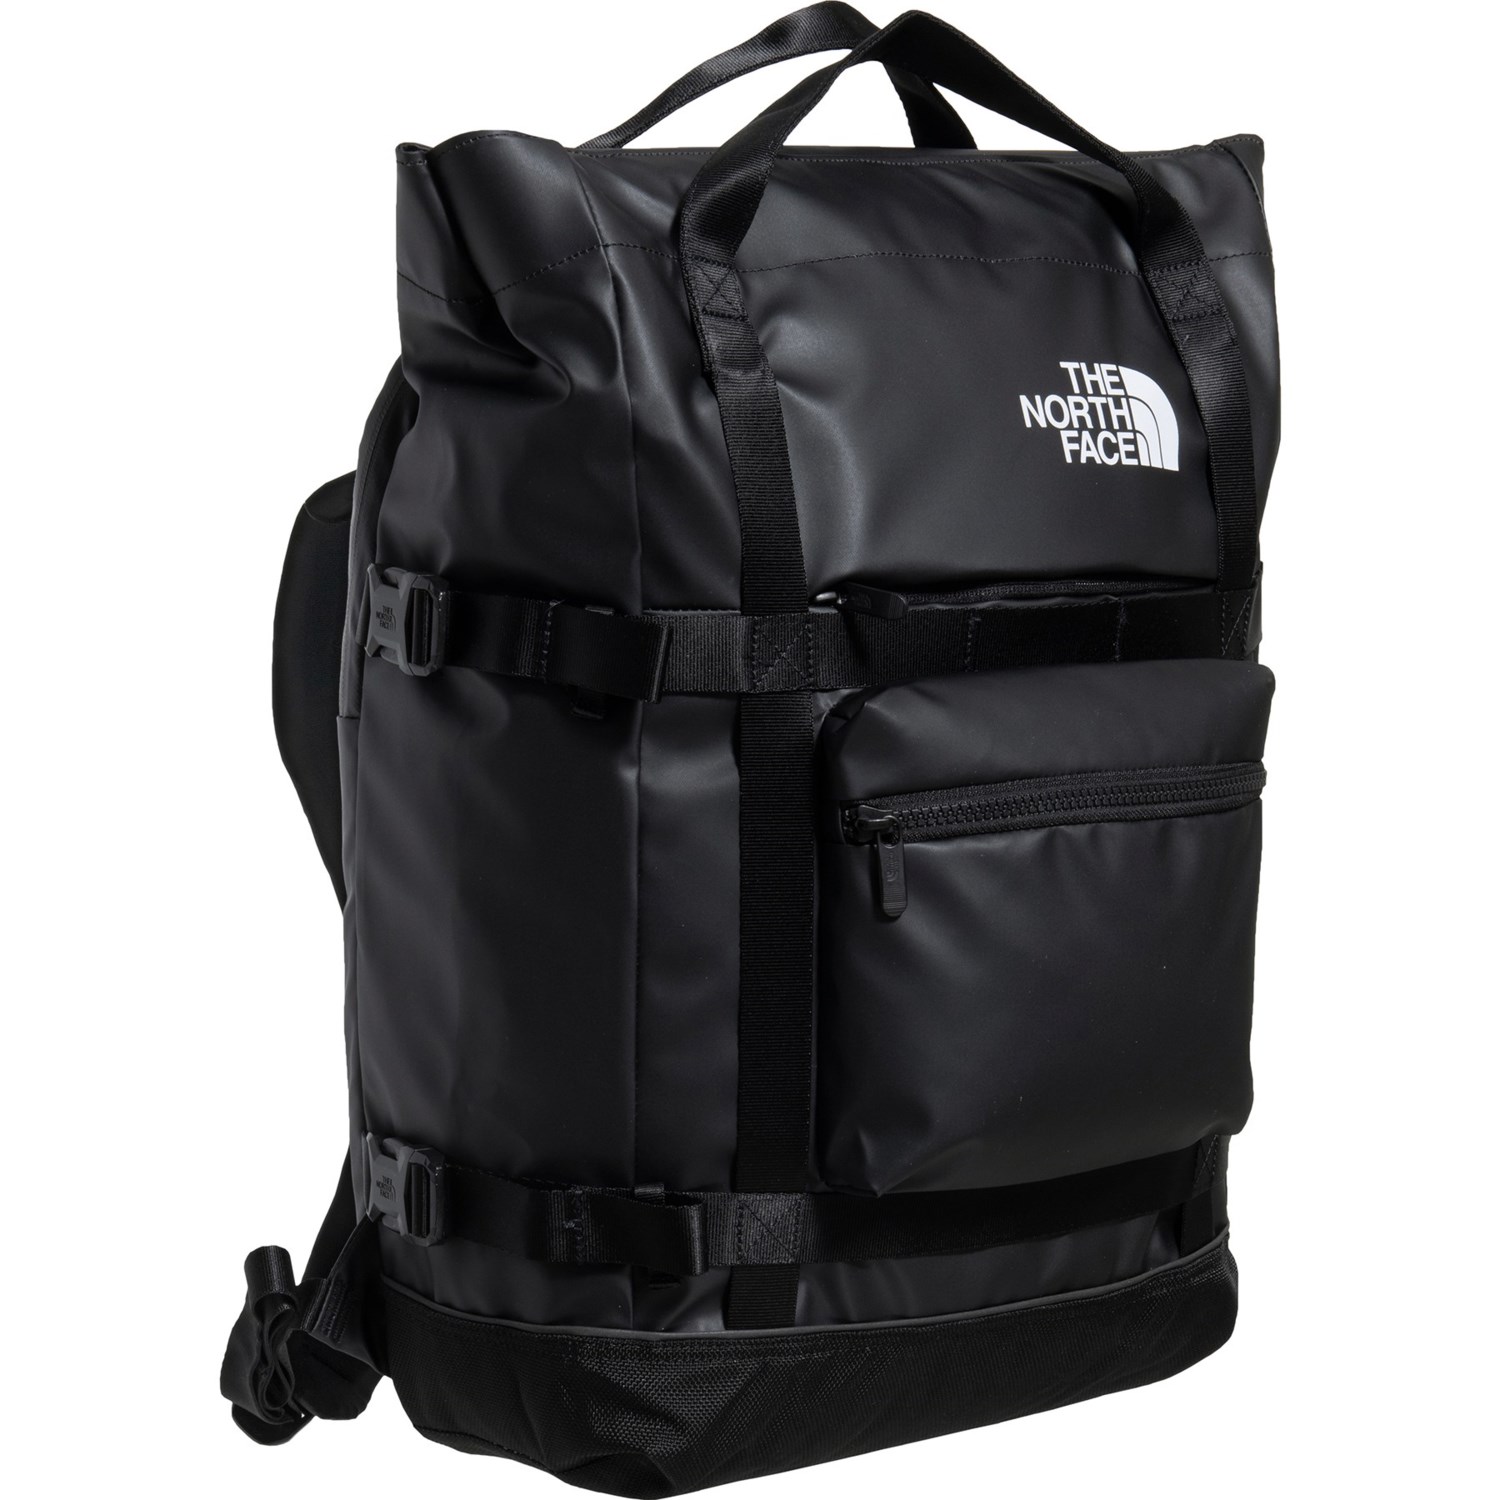 The North Face Large Commuter 28 L Backpack - TNF Black